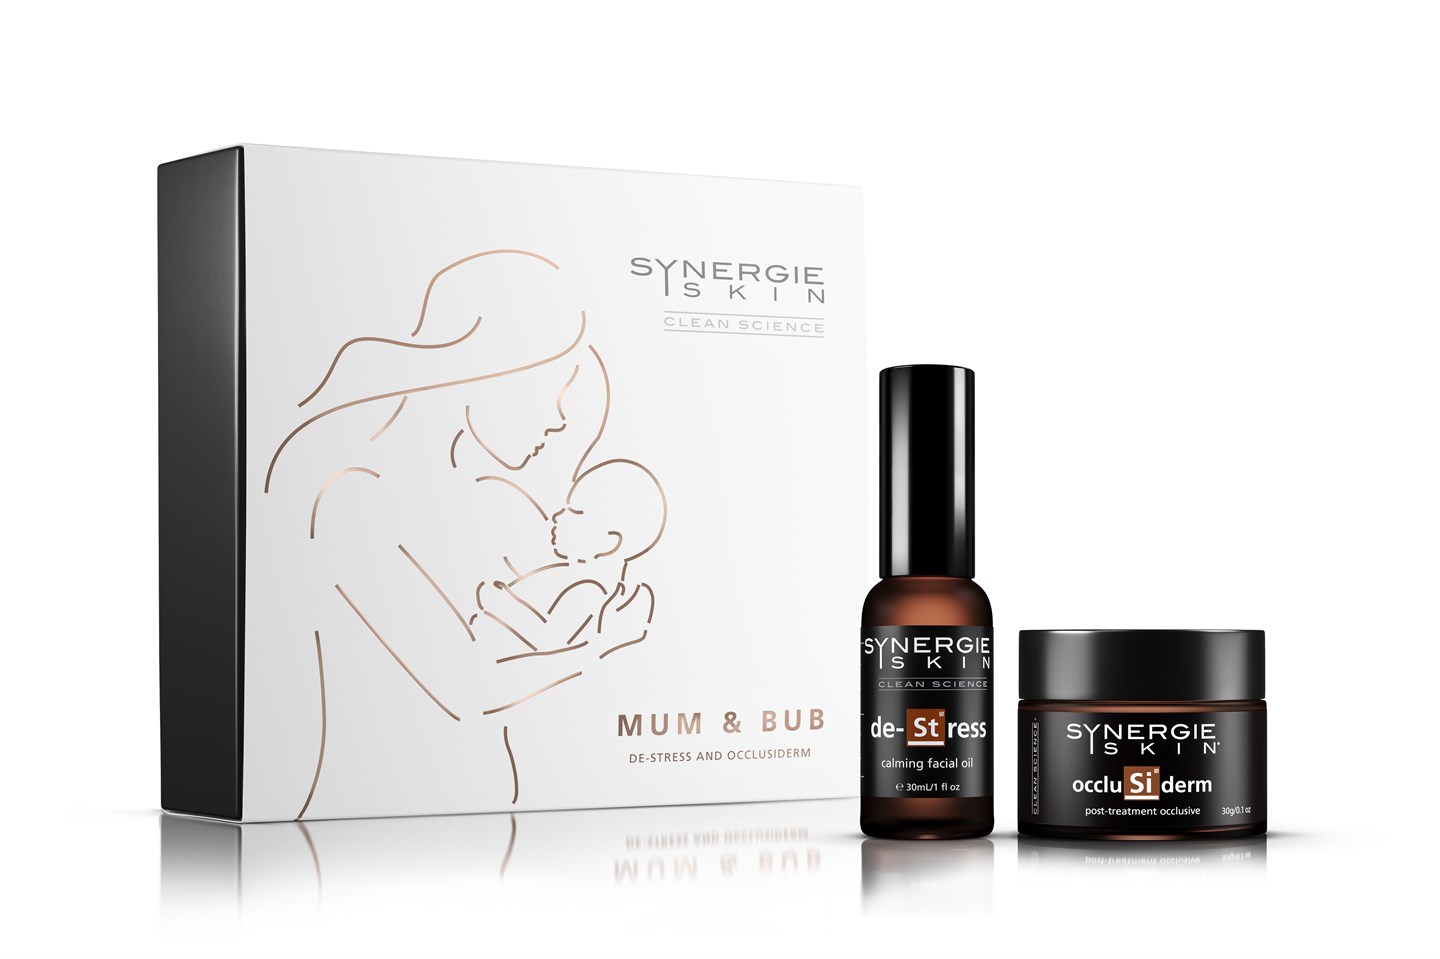 Synergie Skin Mum and Bub (De-Stress and Occlusiderm)